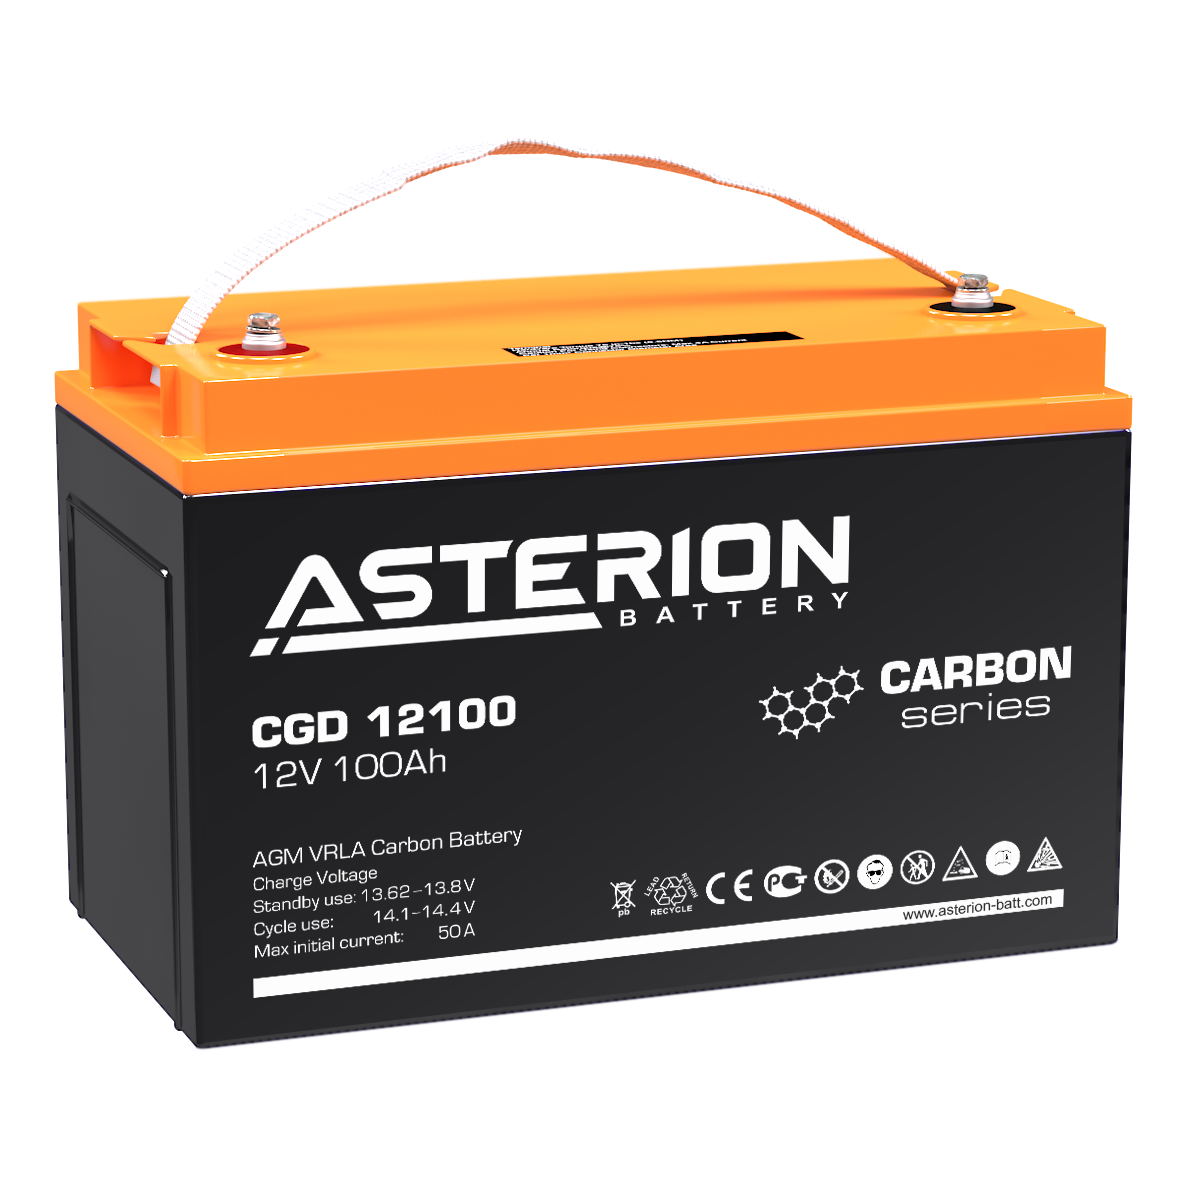 Asterion CGD 12100 12V/100AH AGM Deep Cycle Battery